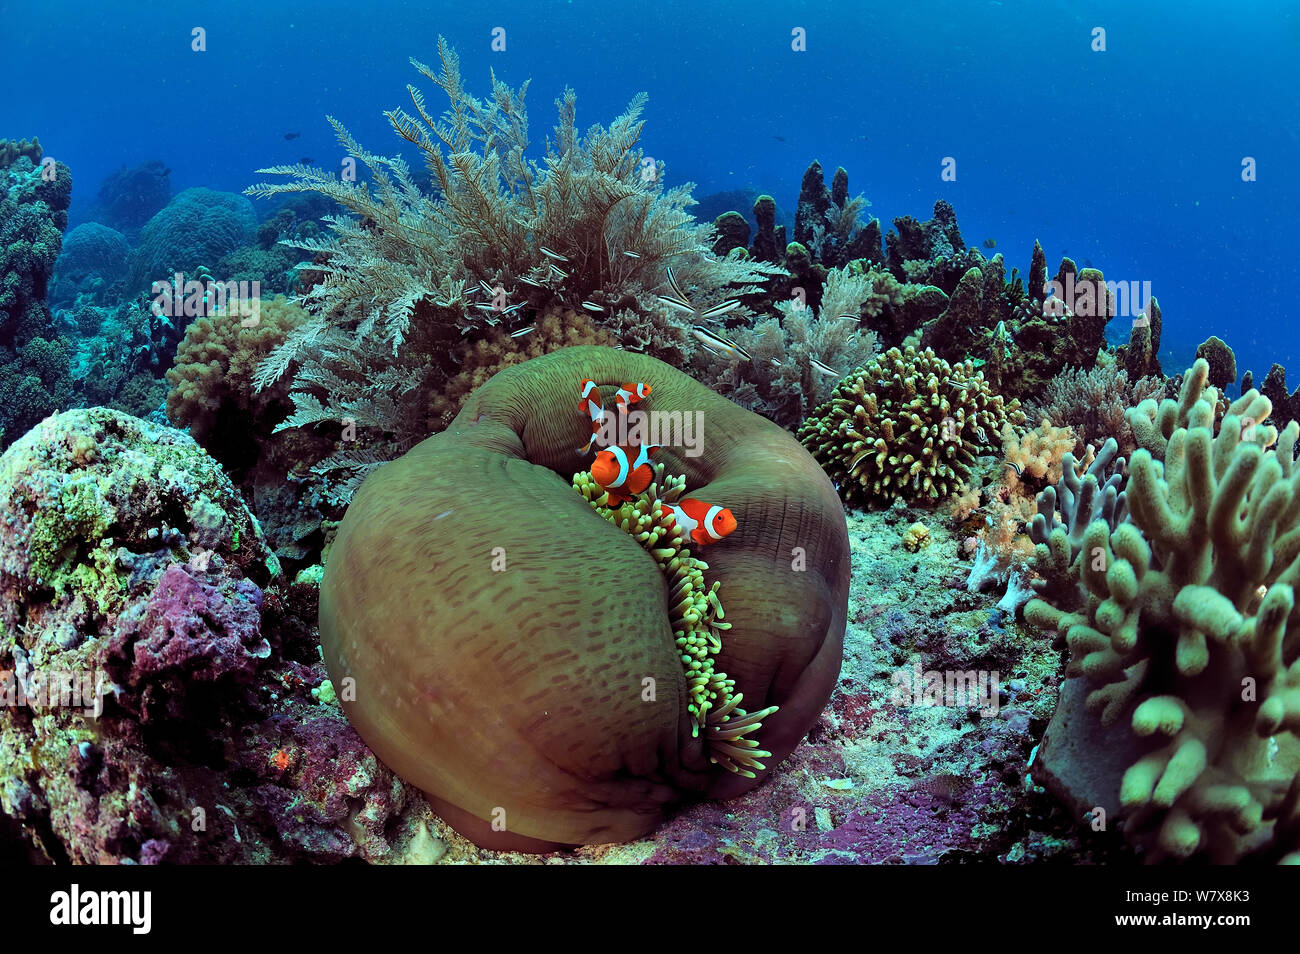 Indonesian coral reef with Magnificent sea anemone (Heteractis magnifica) and False clown anemonefish (Amphiprion ocellaris), hydroids and hard corals, Manado, Indonesia. Sulawesi Sea. Stock Photo